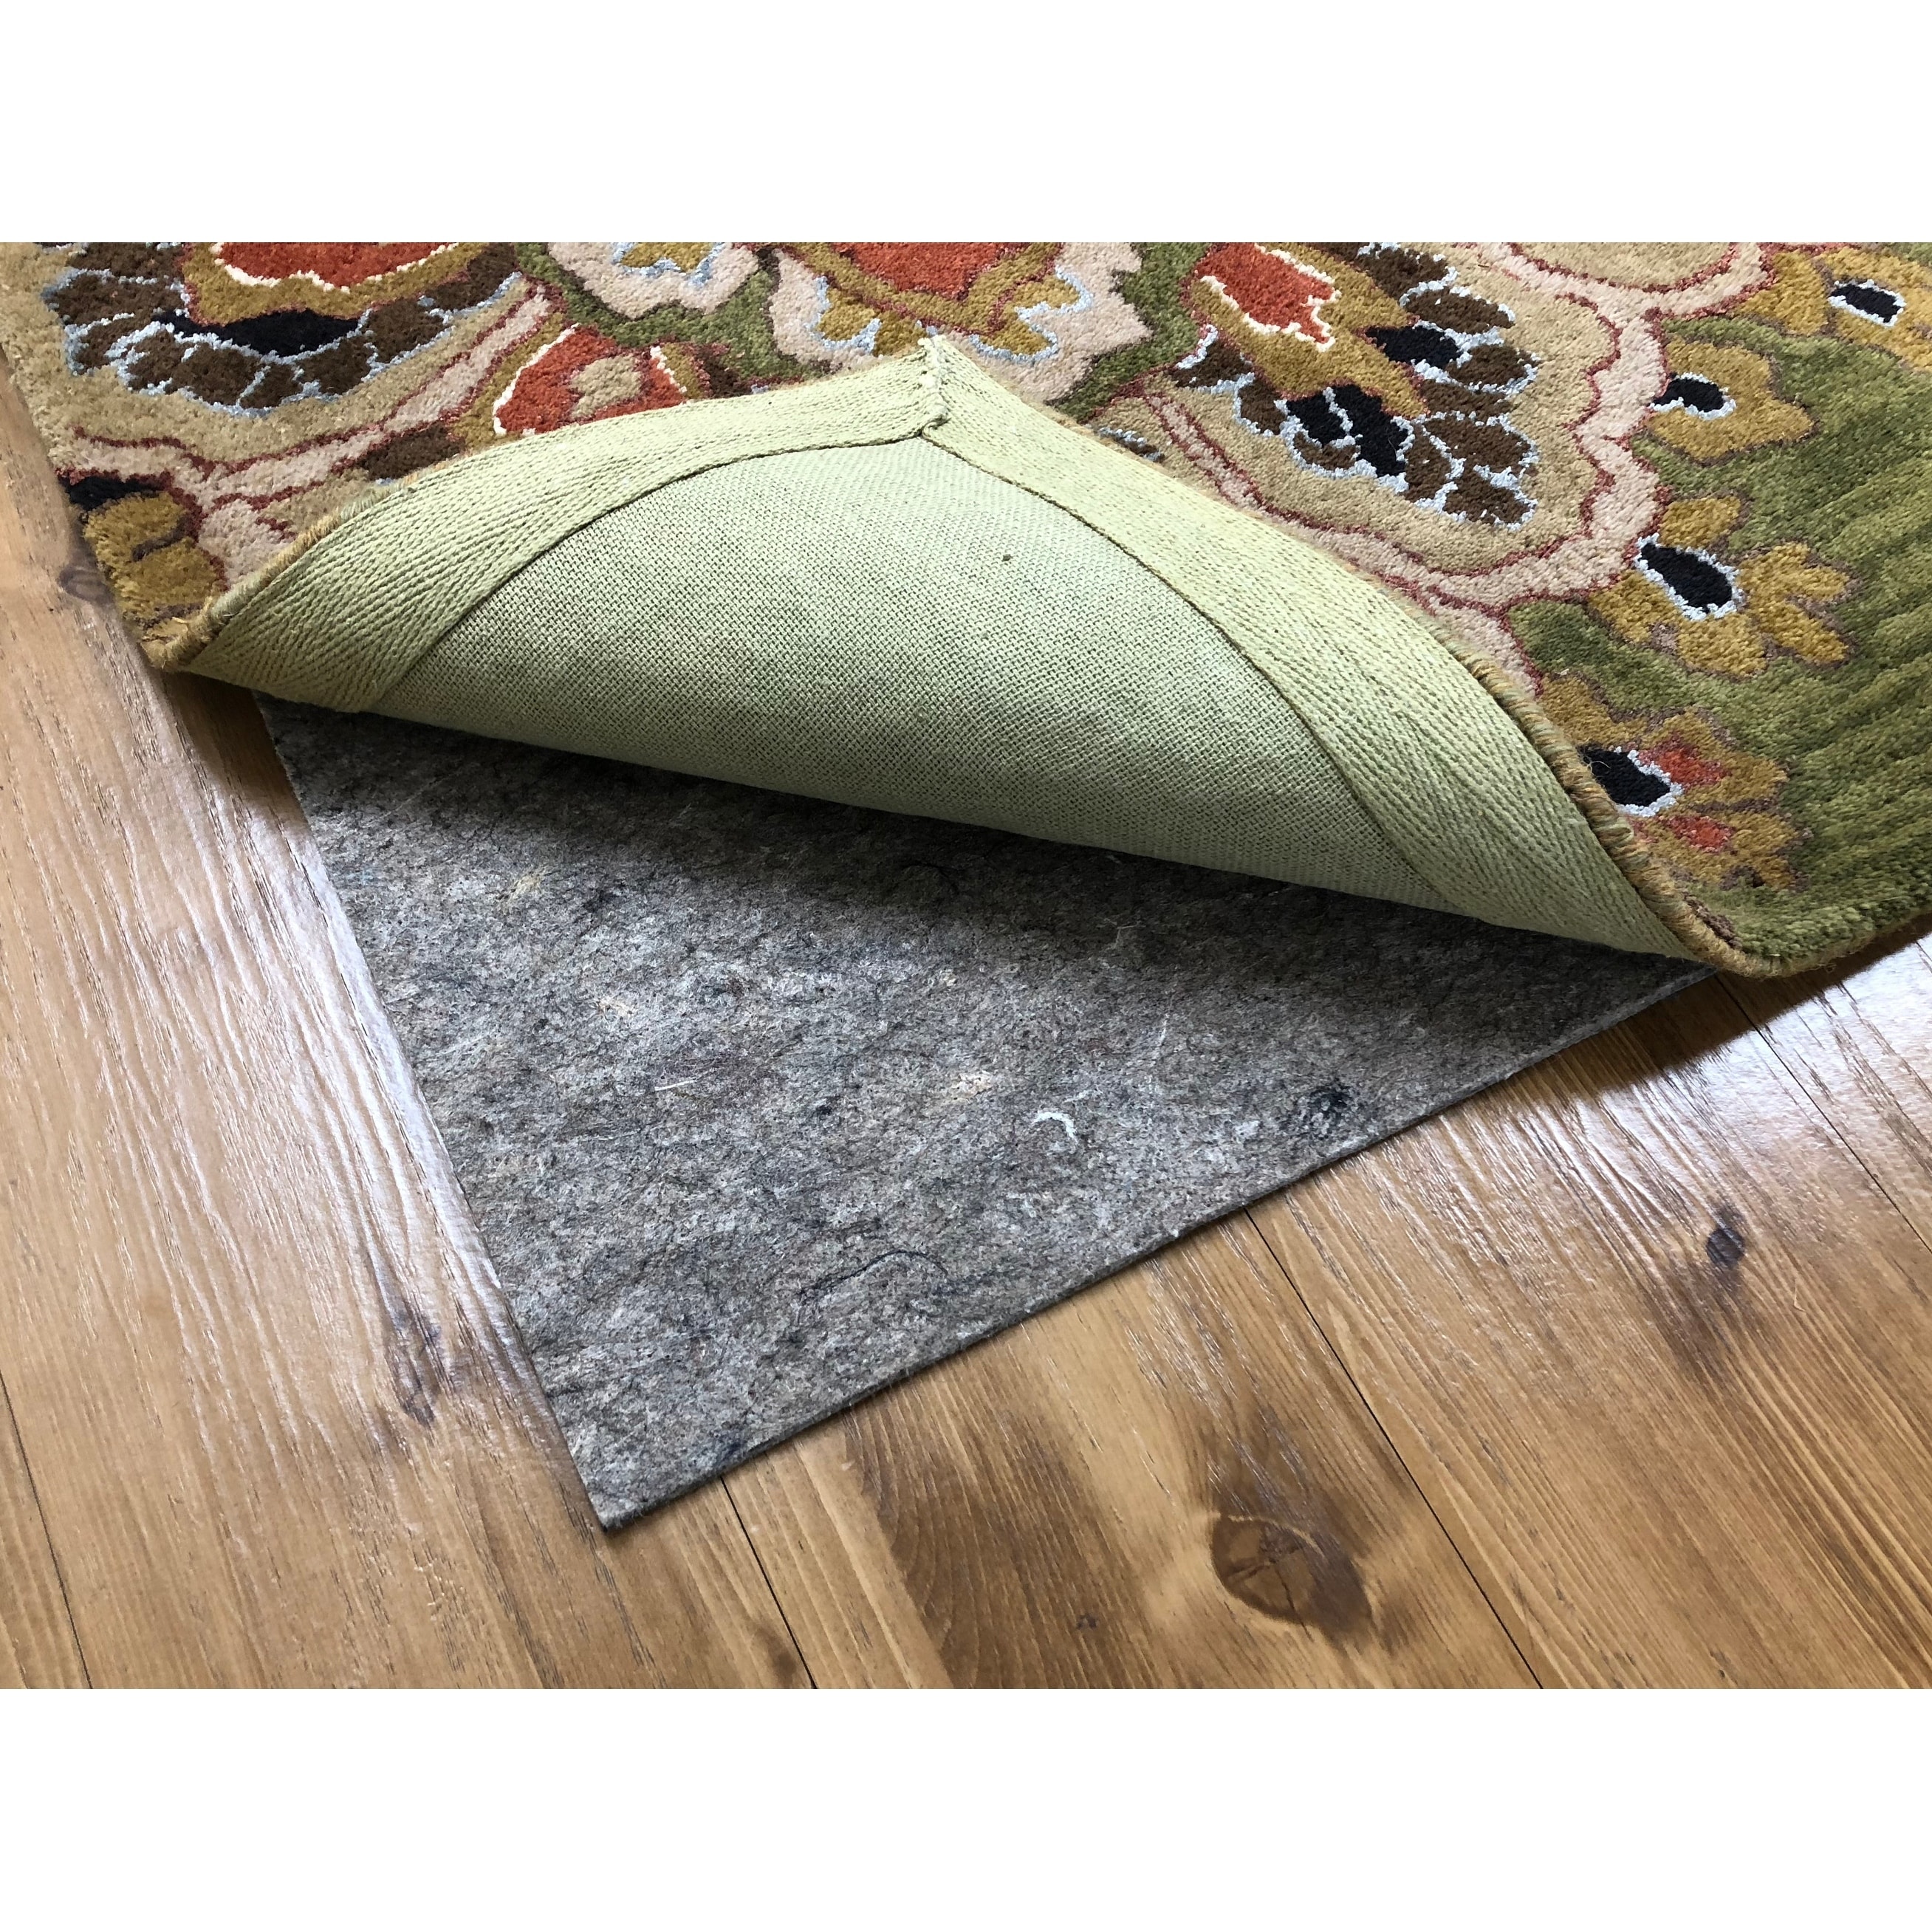 Rug Gripper Non Slip Rug Pad Underlay for Hardwood Floors Supper Grip Thick  Padding Adds Cushion Prevents Sliding Size 2 x10